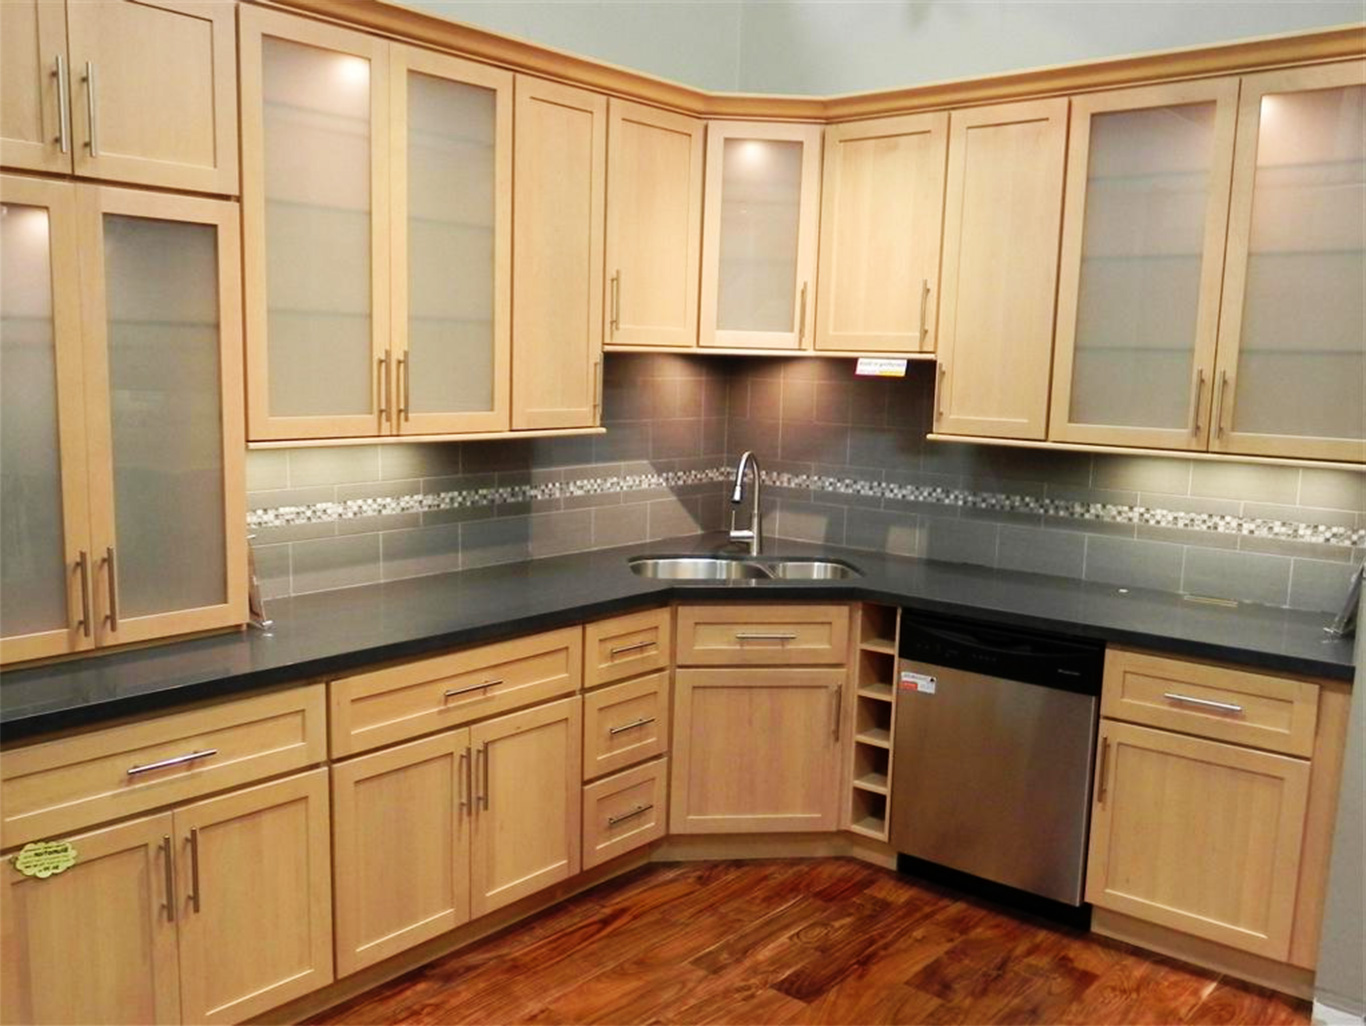 kitchen design ideas with maple cabinets photo - 3